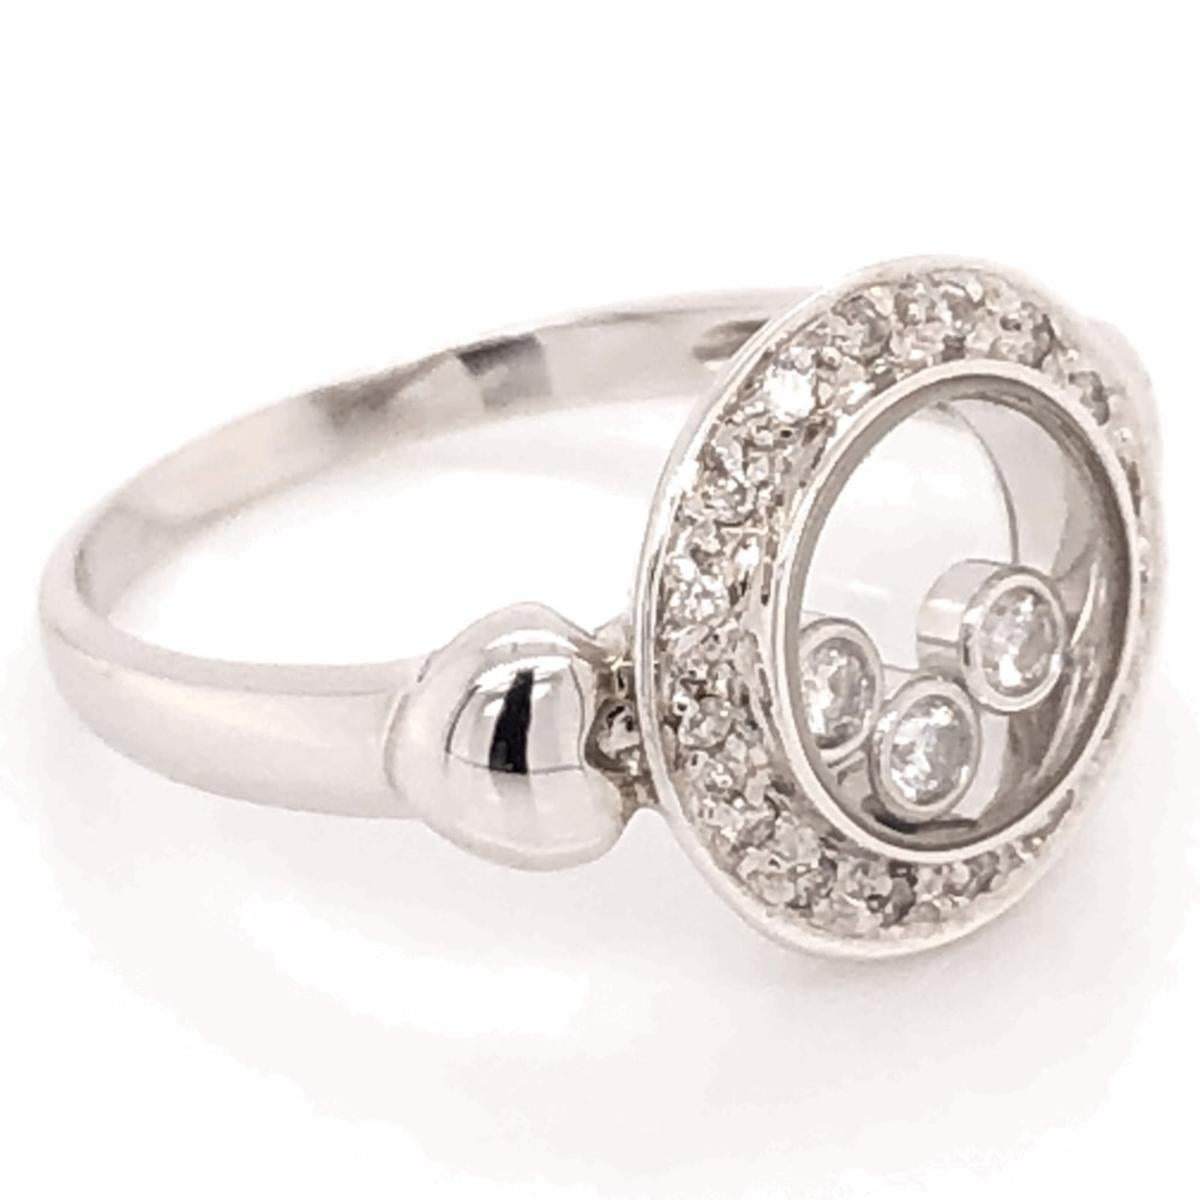 Beautiful & finely detailed Happy Floating Diamond white Gold Ring set with 3 bezel set floating Diamonds, approx. 0.32 total carat weight; Brilliant-cut diamonds are at their most beautiful when their 'fire' is lit by movement. Like water droplets